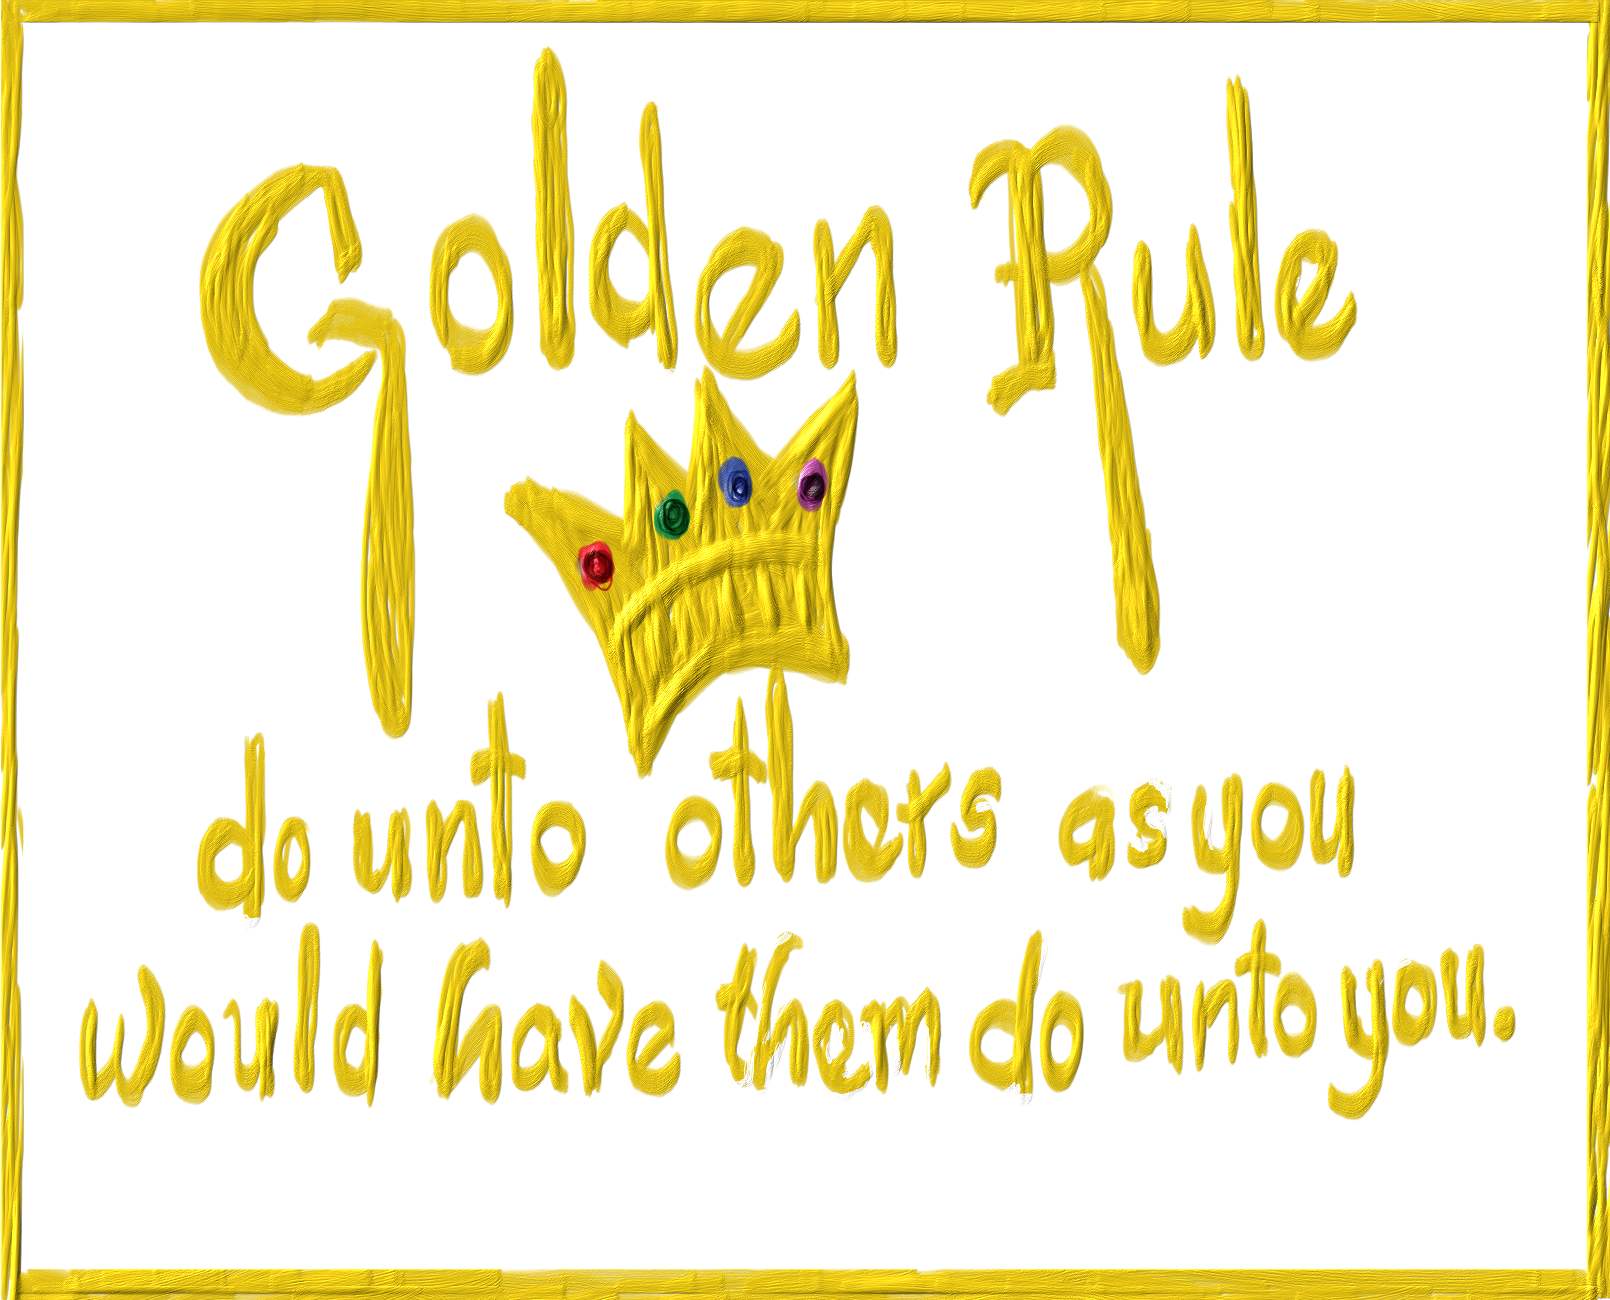 What does The Golden Rule mean to you?